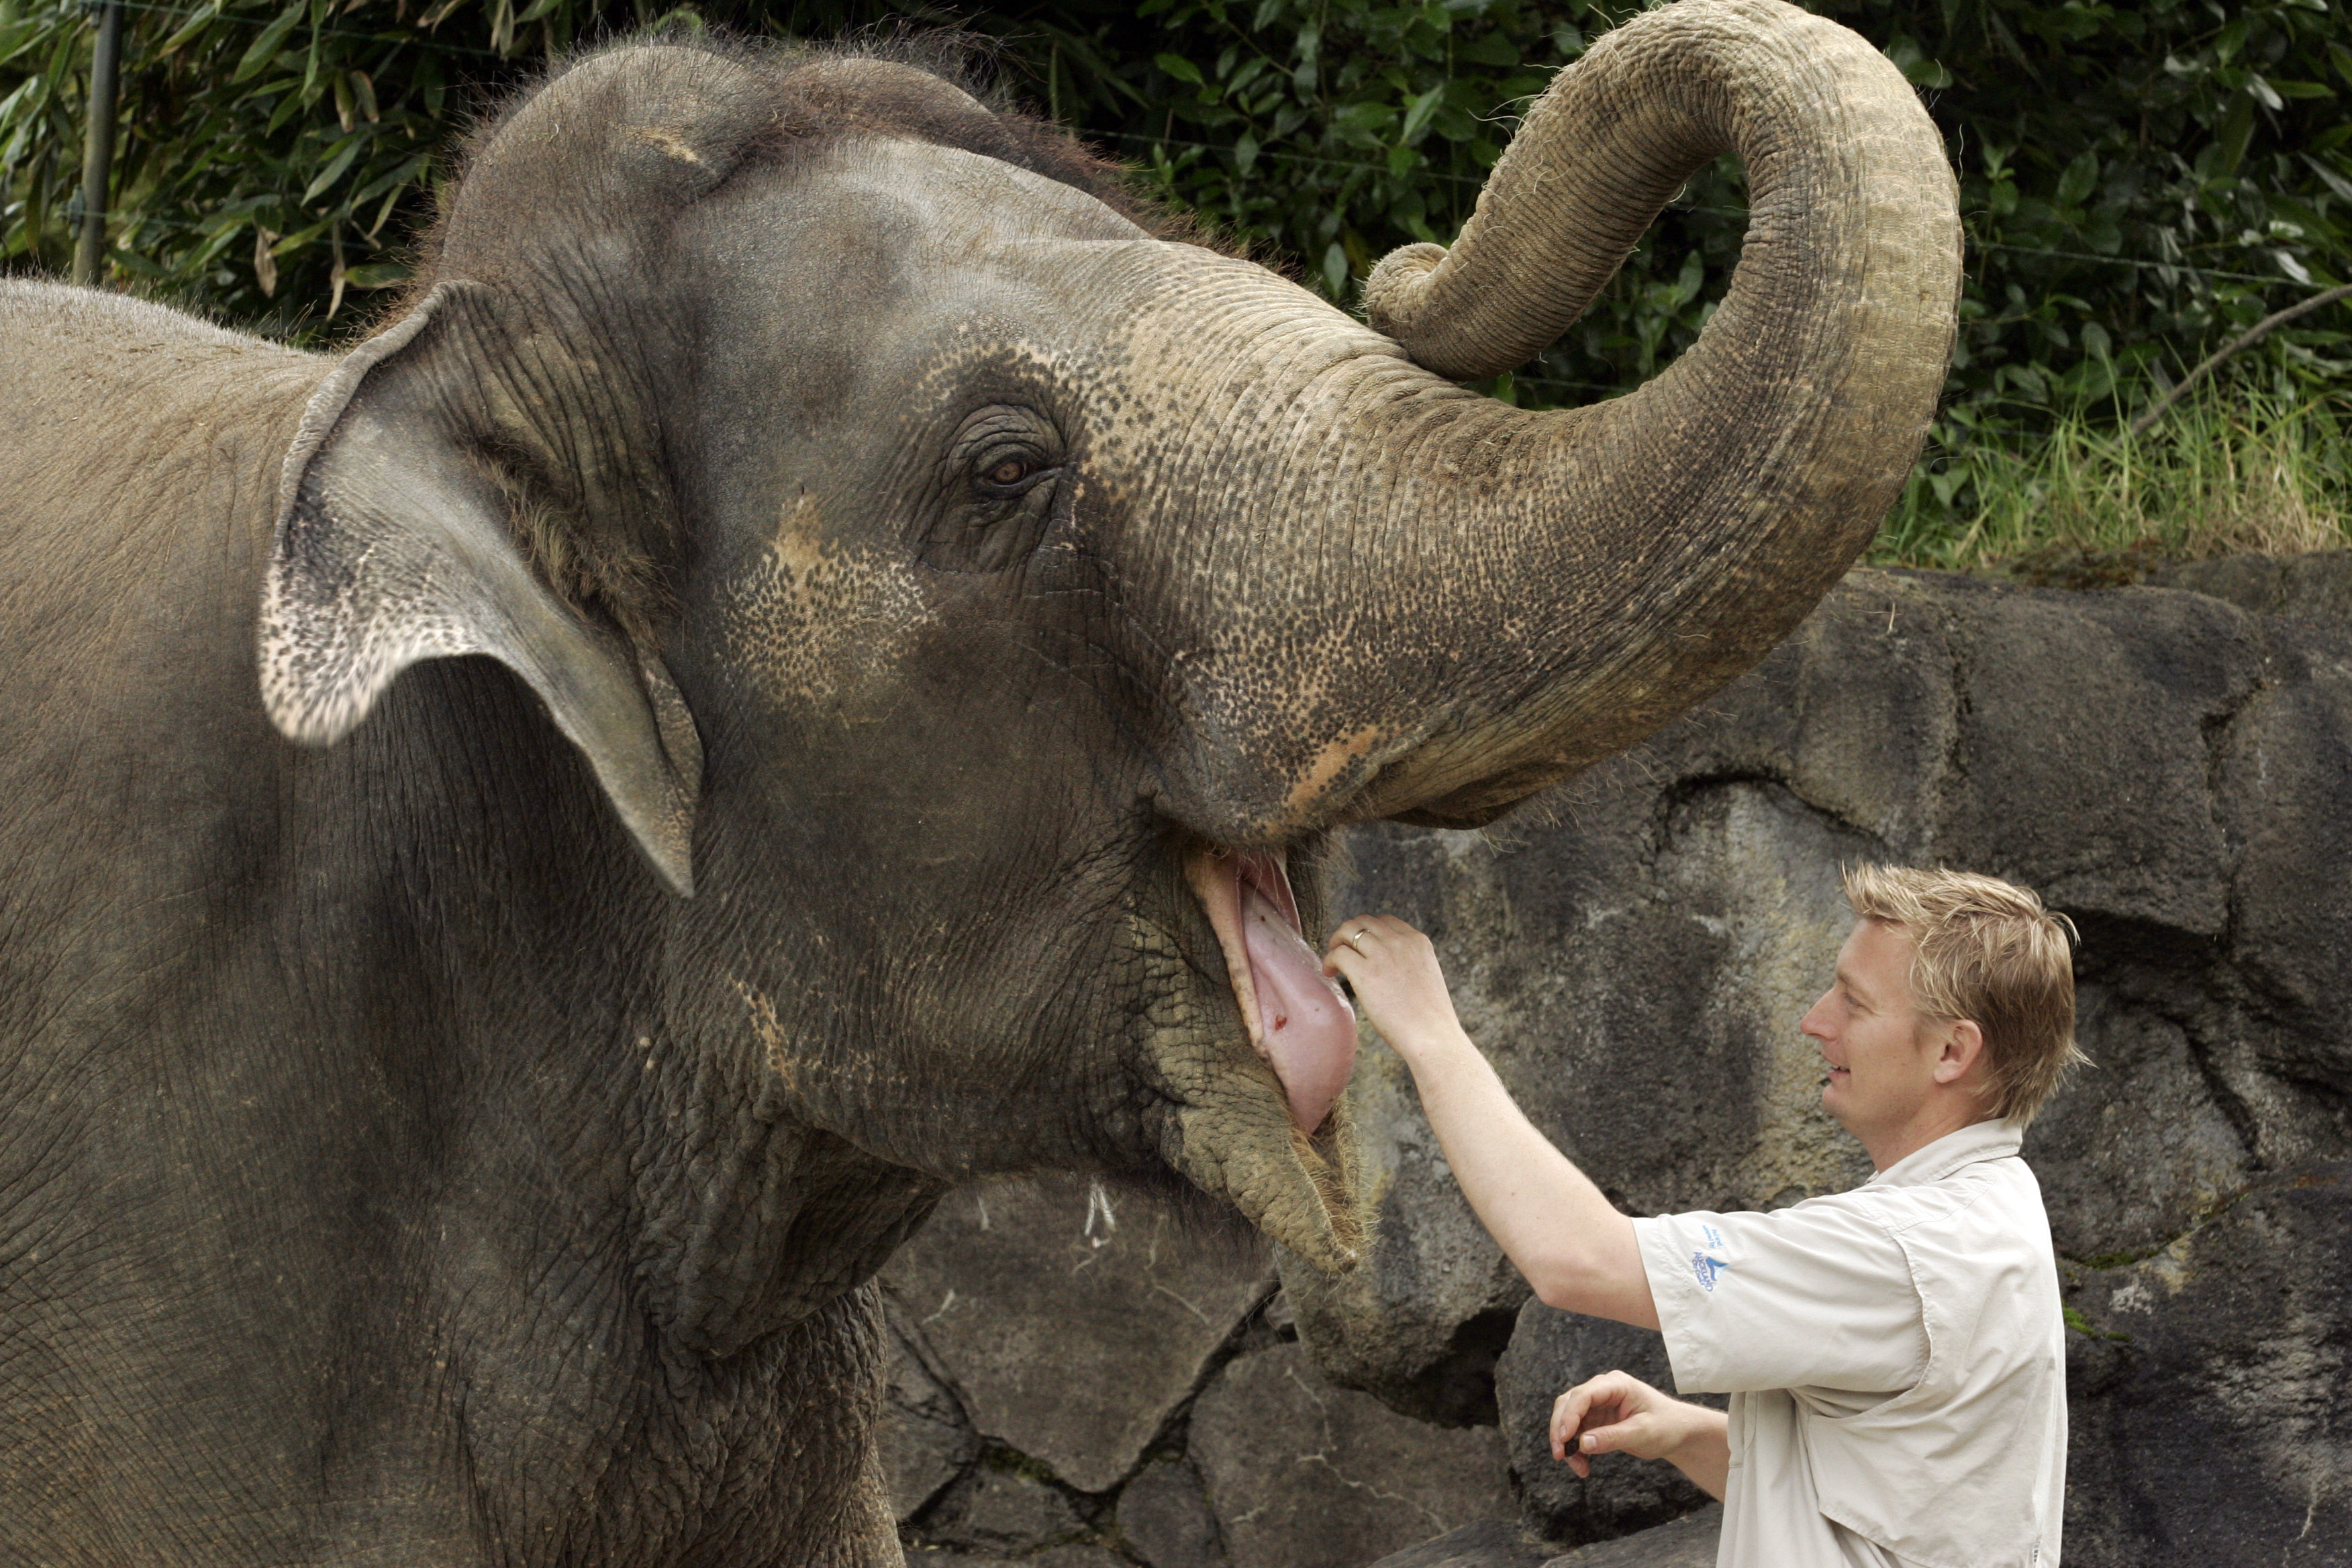 Shar Carlin: Zoo happiest home for this elephant - NZ Herald